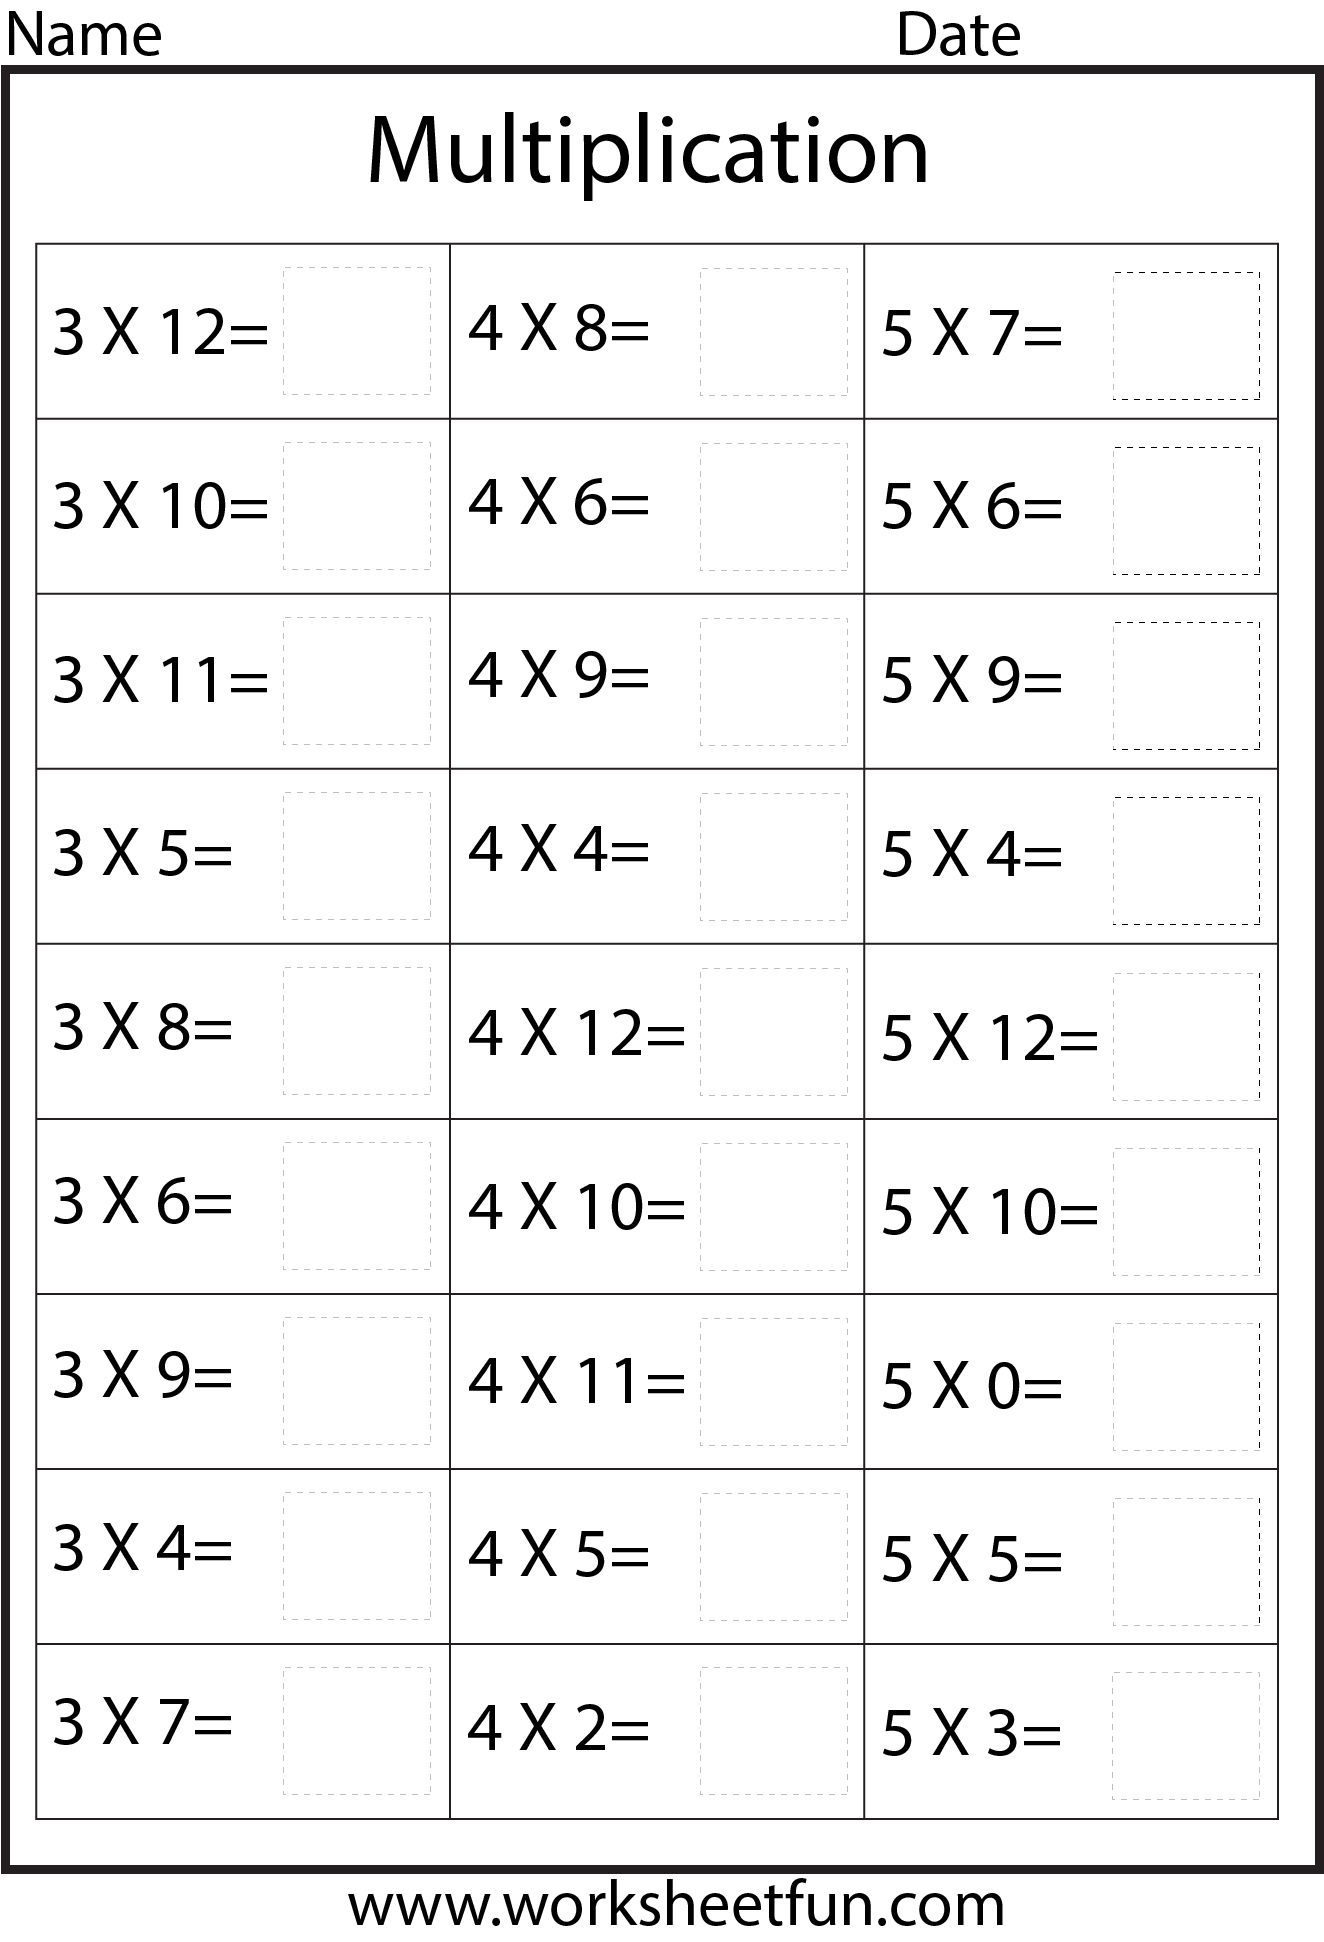 Multiplication tables worksheet printable 3 times 4 time 5 times